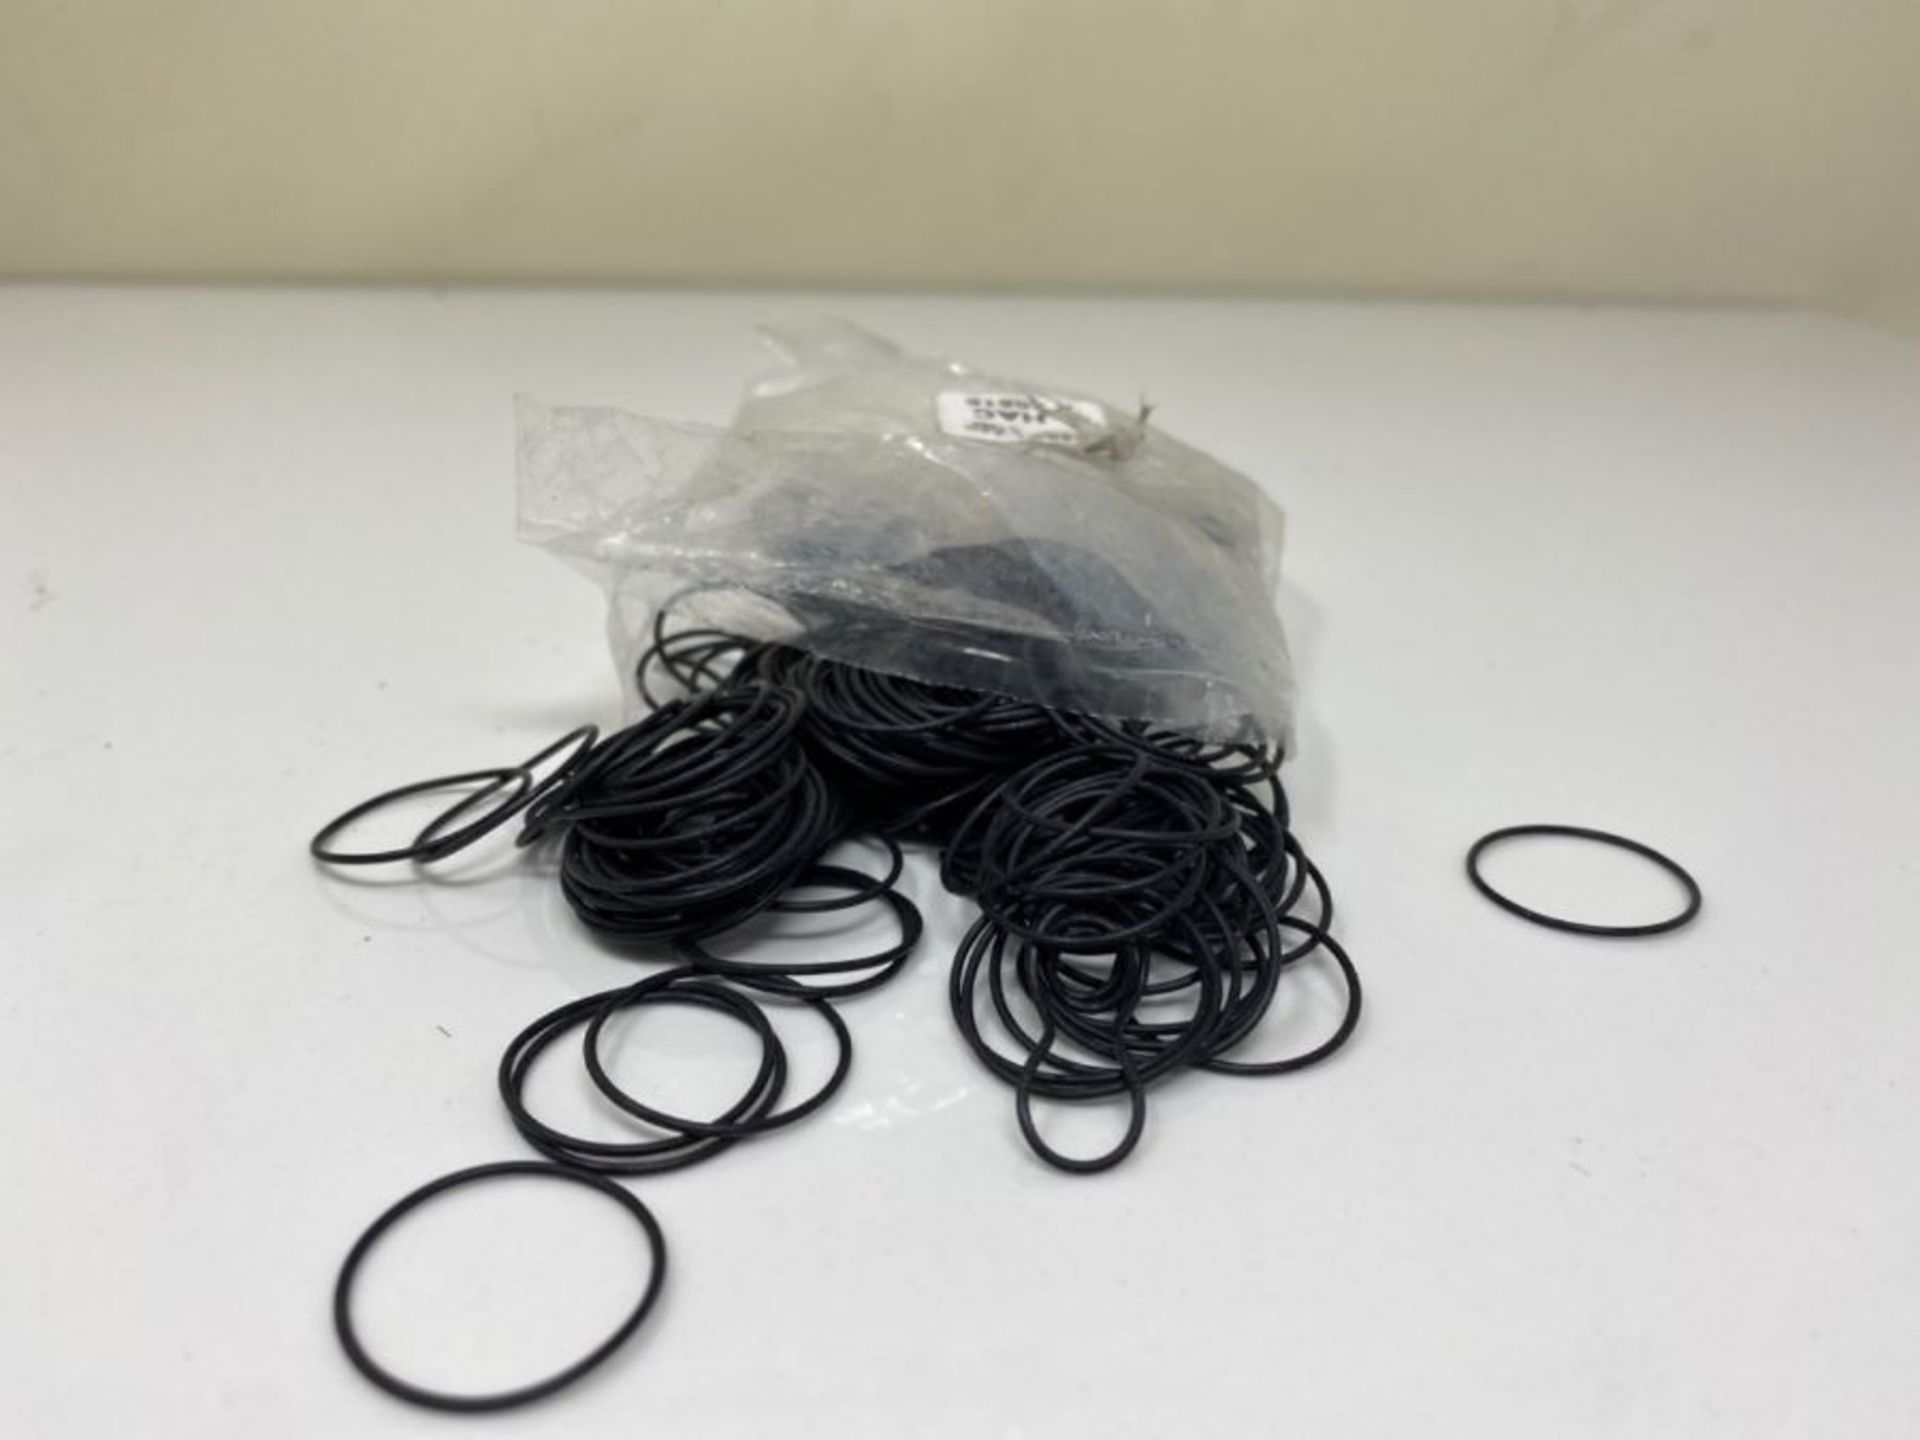 Totally Seals® 20mm x 1mm (22mm OD) Black Nitrile (NBR) Rubber Metric O-Rings - 70A S - Image 2 of 2